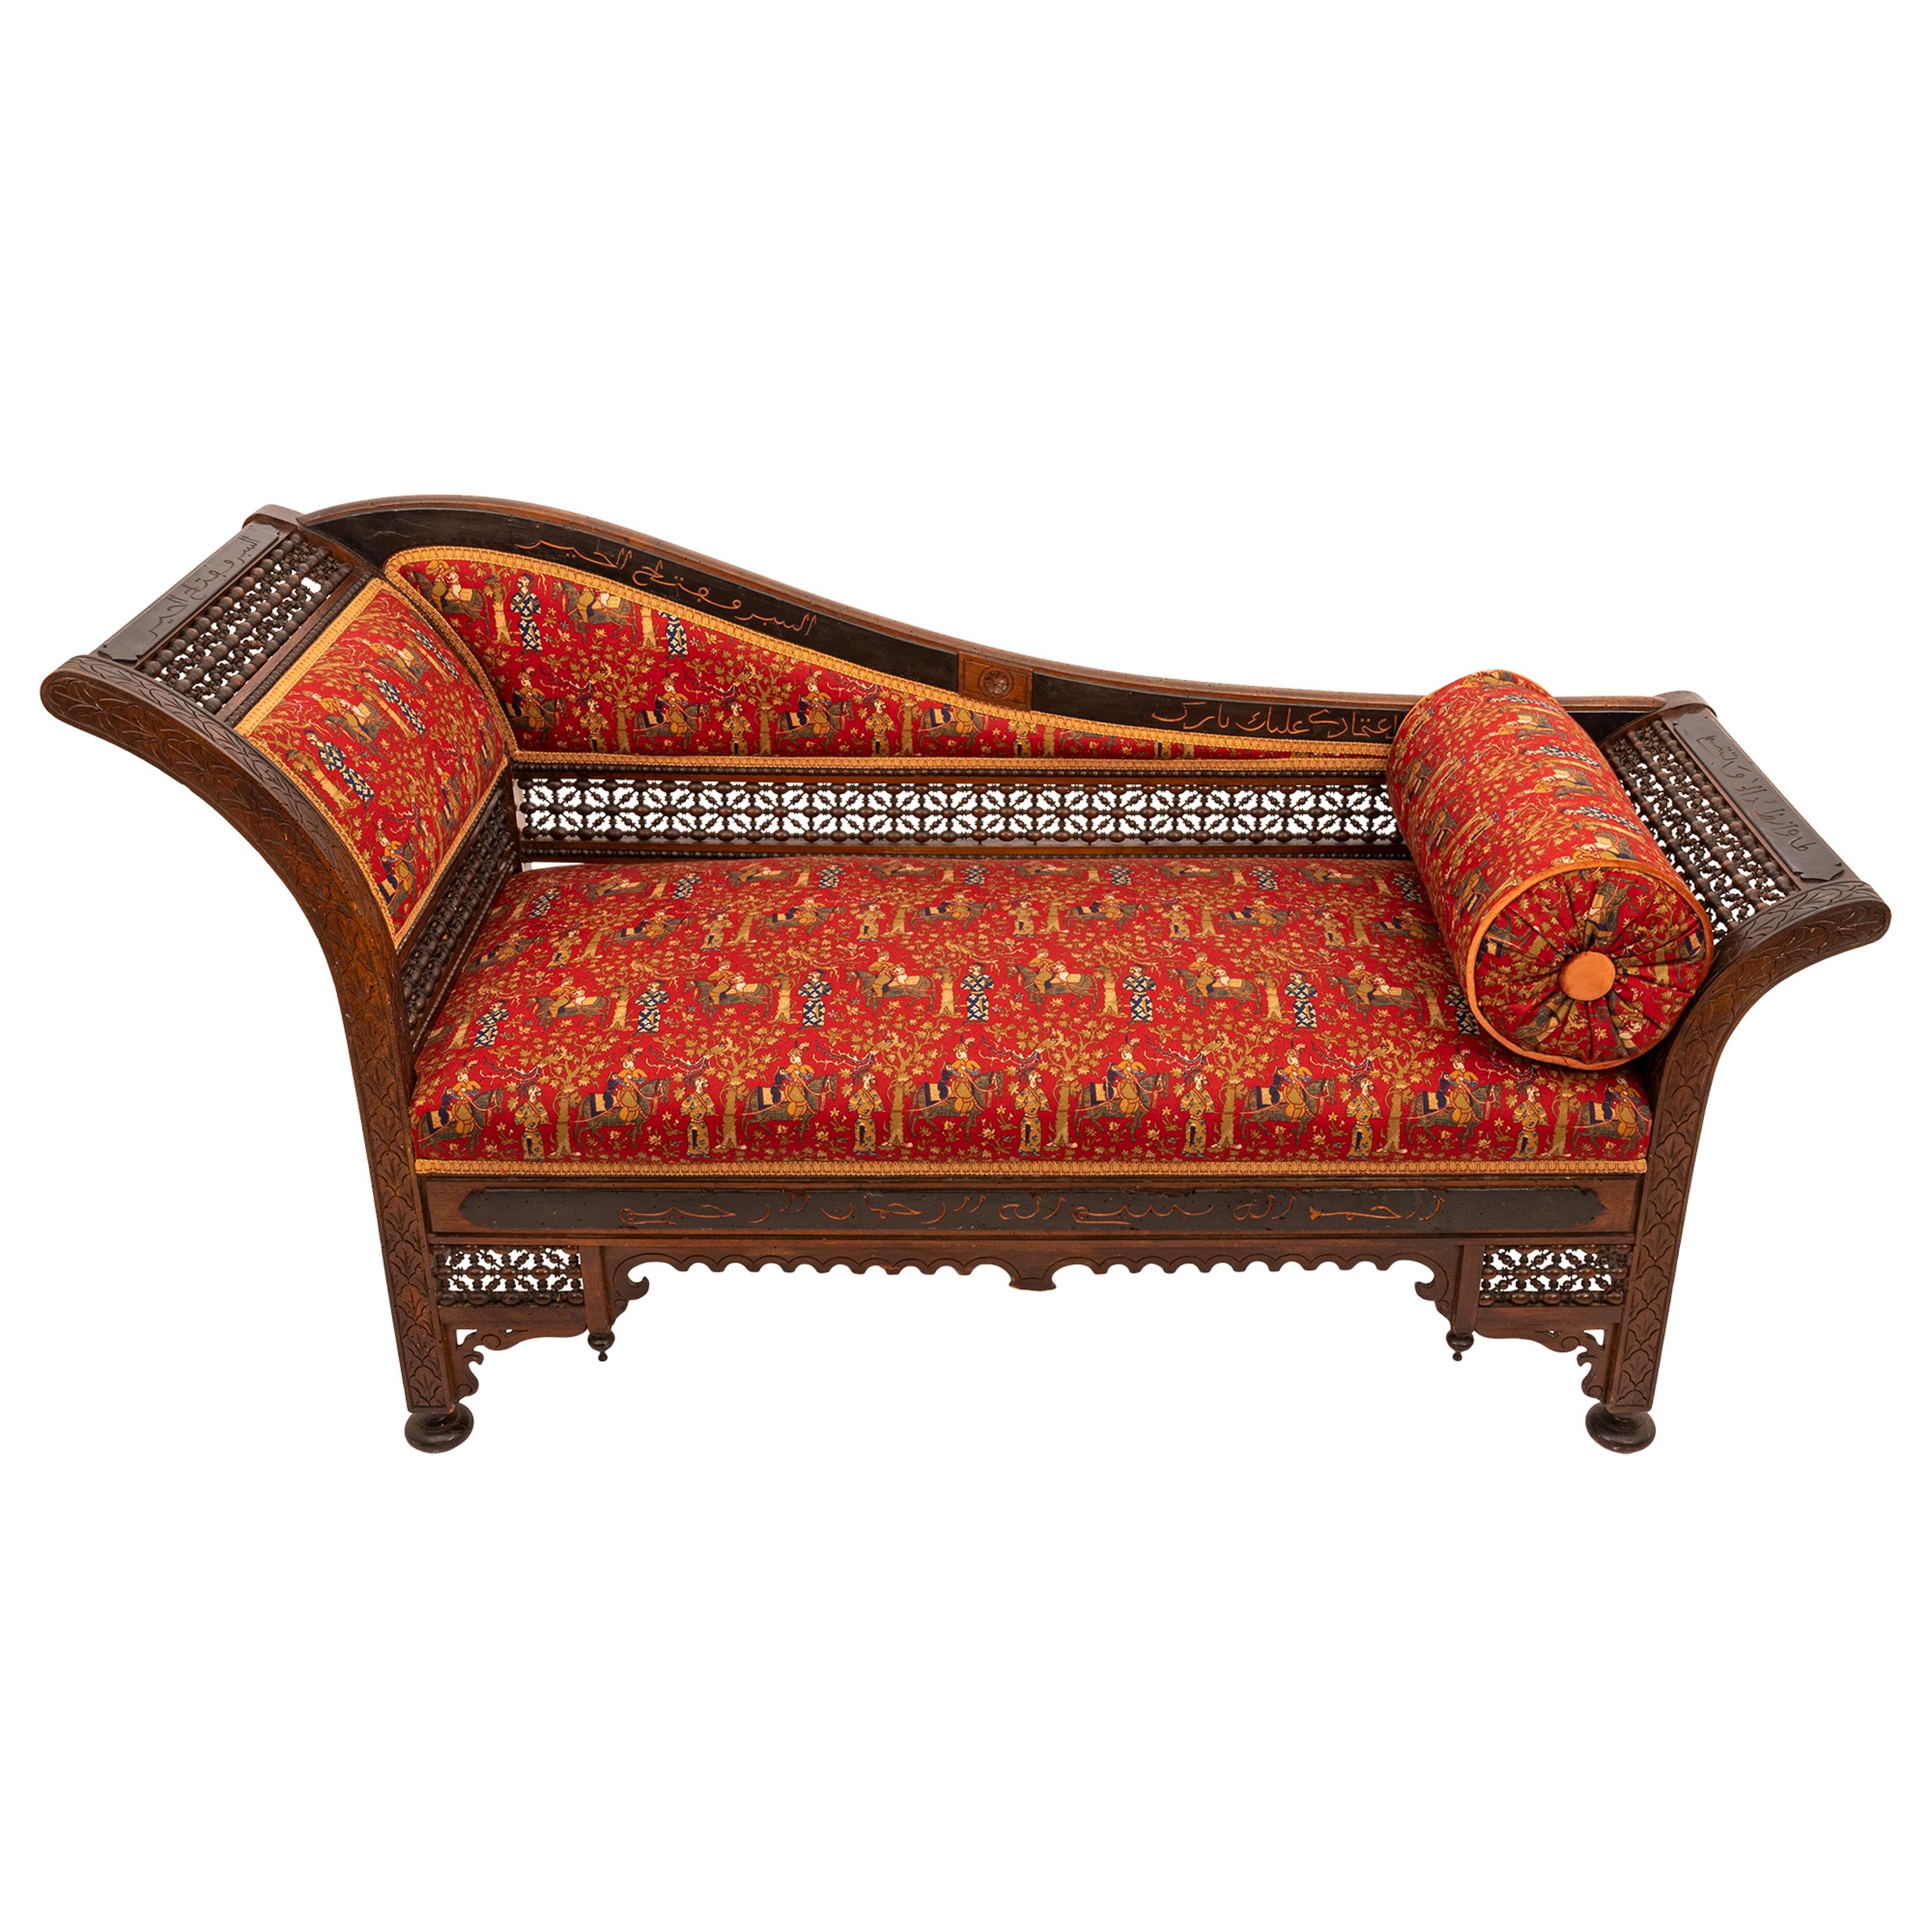 An elegant antique Arabesque chaise longue sofa, circa 1880.
The sofa in the Moorish style and most likely made in Syria or another country in the Levant, in the last quarter of the 19th century. The chaise has just been professionally